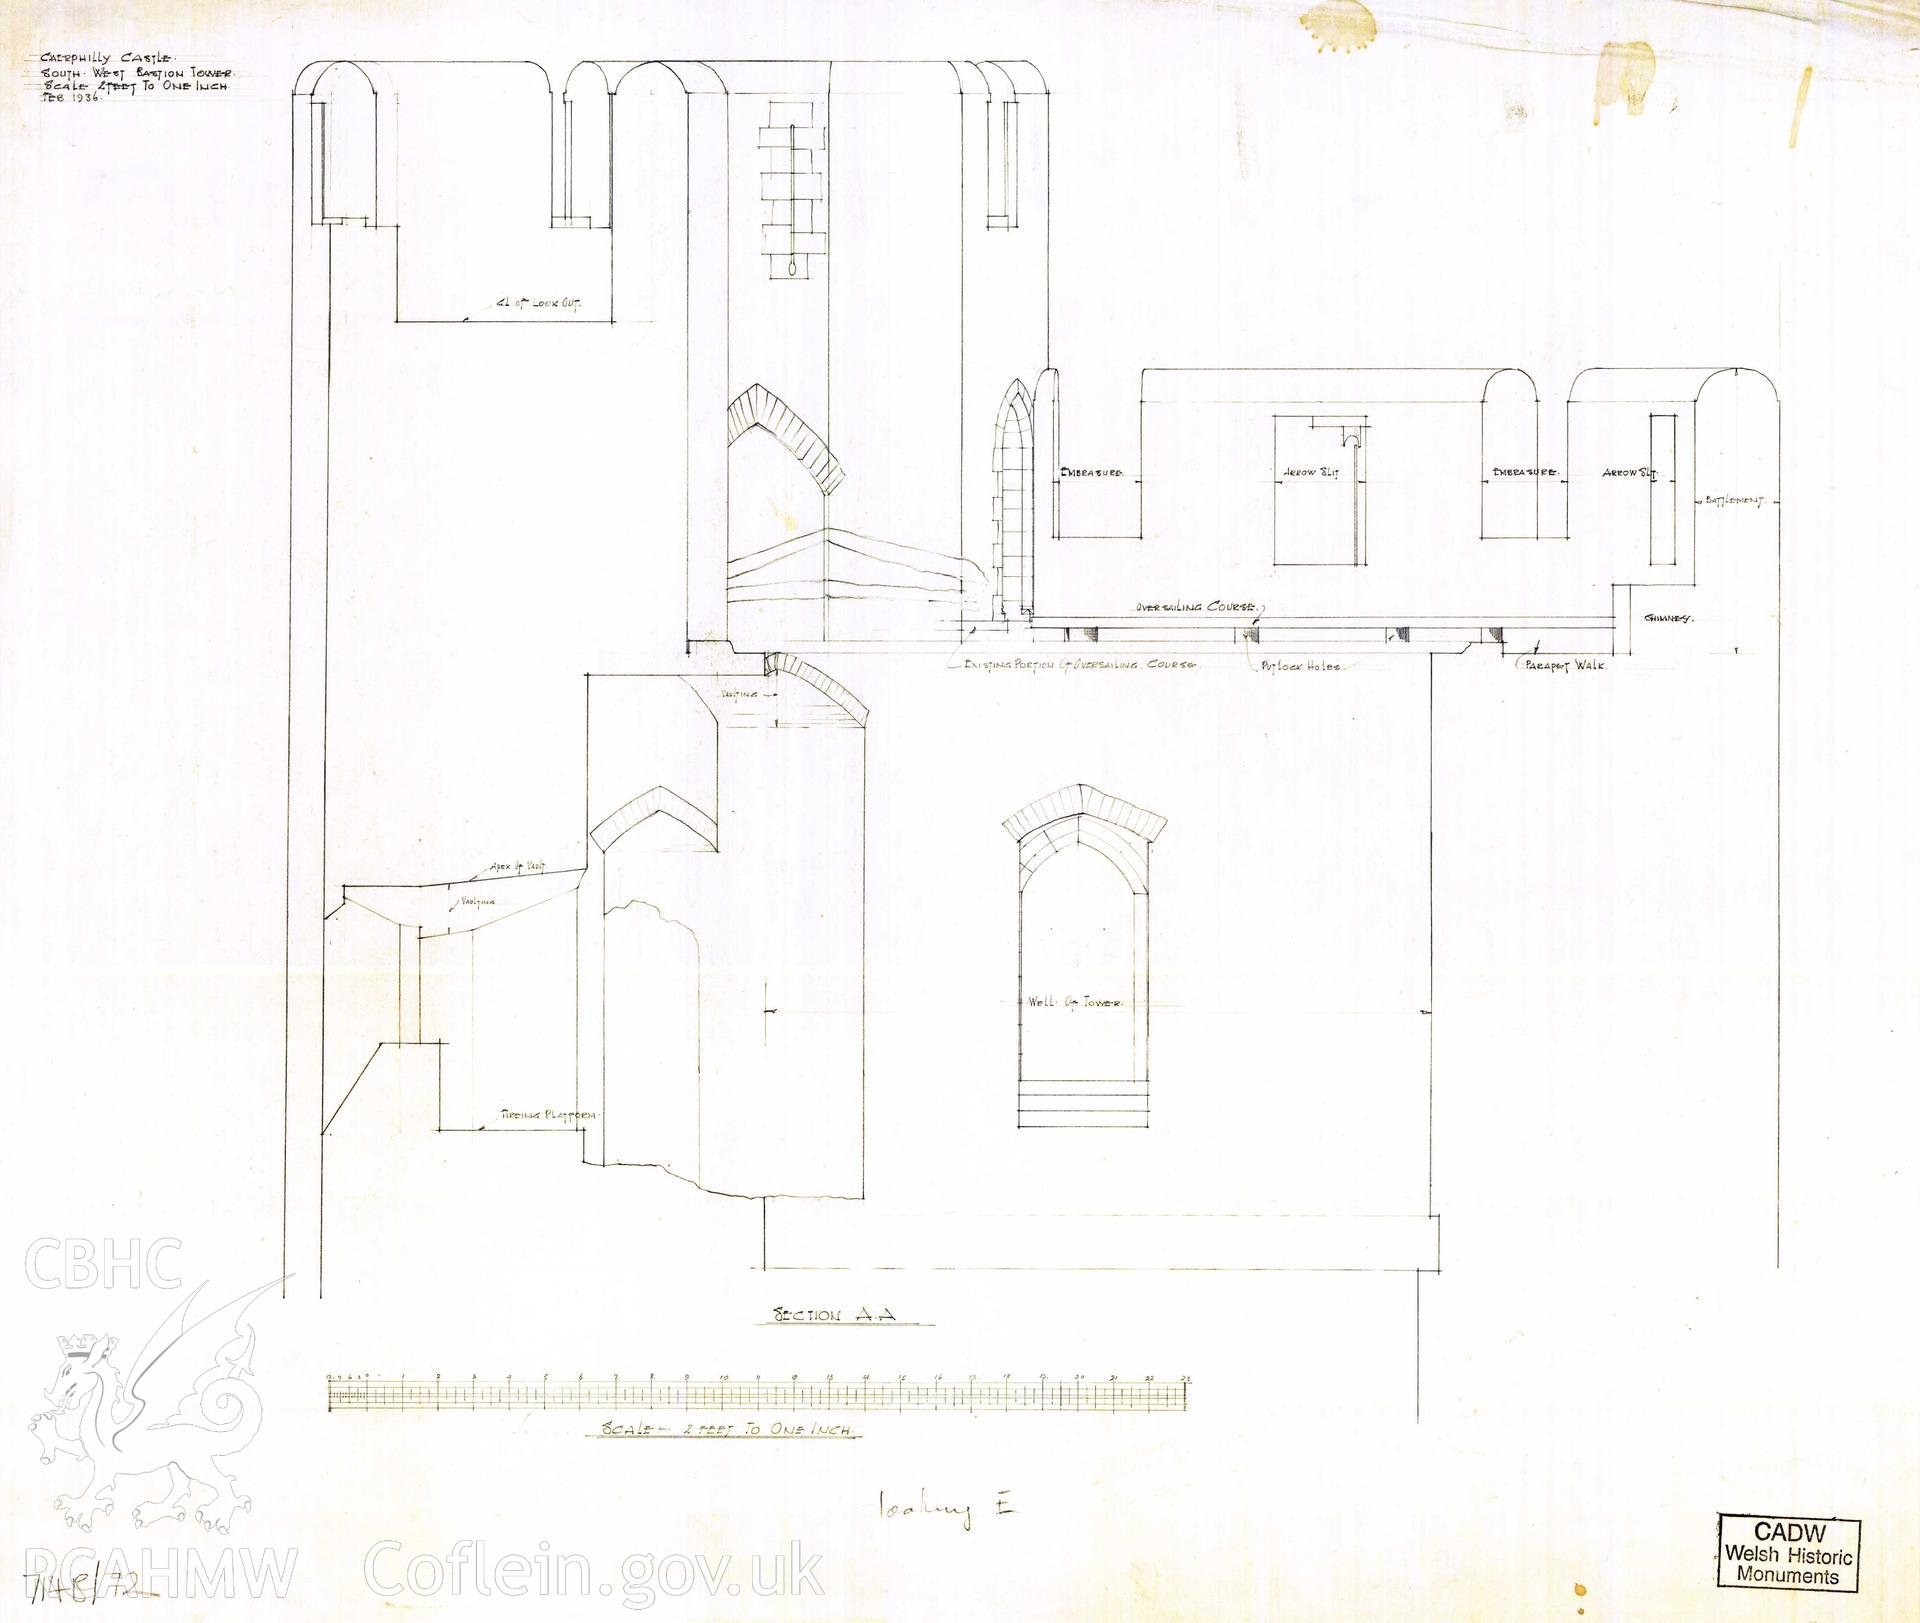 Digital copy of Cadw guardianship monument drawing of Caerphilly Castle. SW tower, top fl parapet section A. Cadw ref. no: 714B/72. Scale 1:24. Original drawing withdrawn and returned to Cadw at their request.